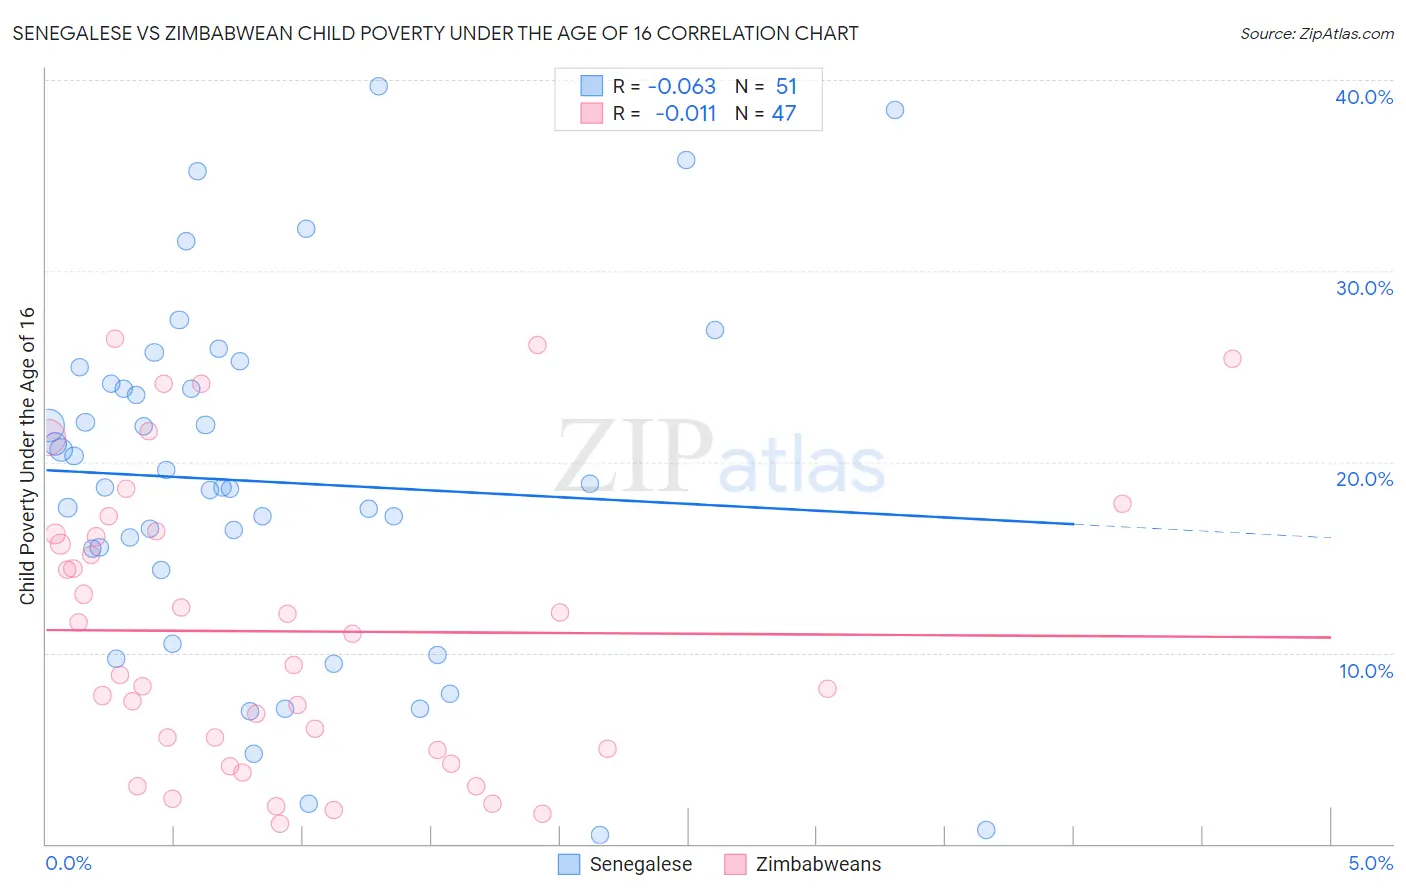 Senegalese vs Zimbabwean Child Poverty Under the Age of 16